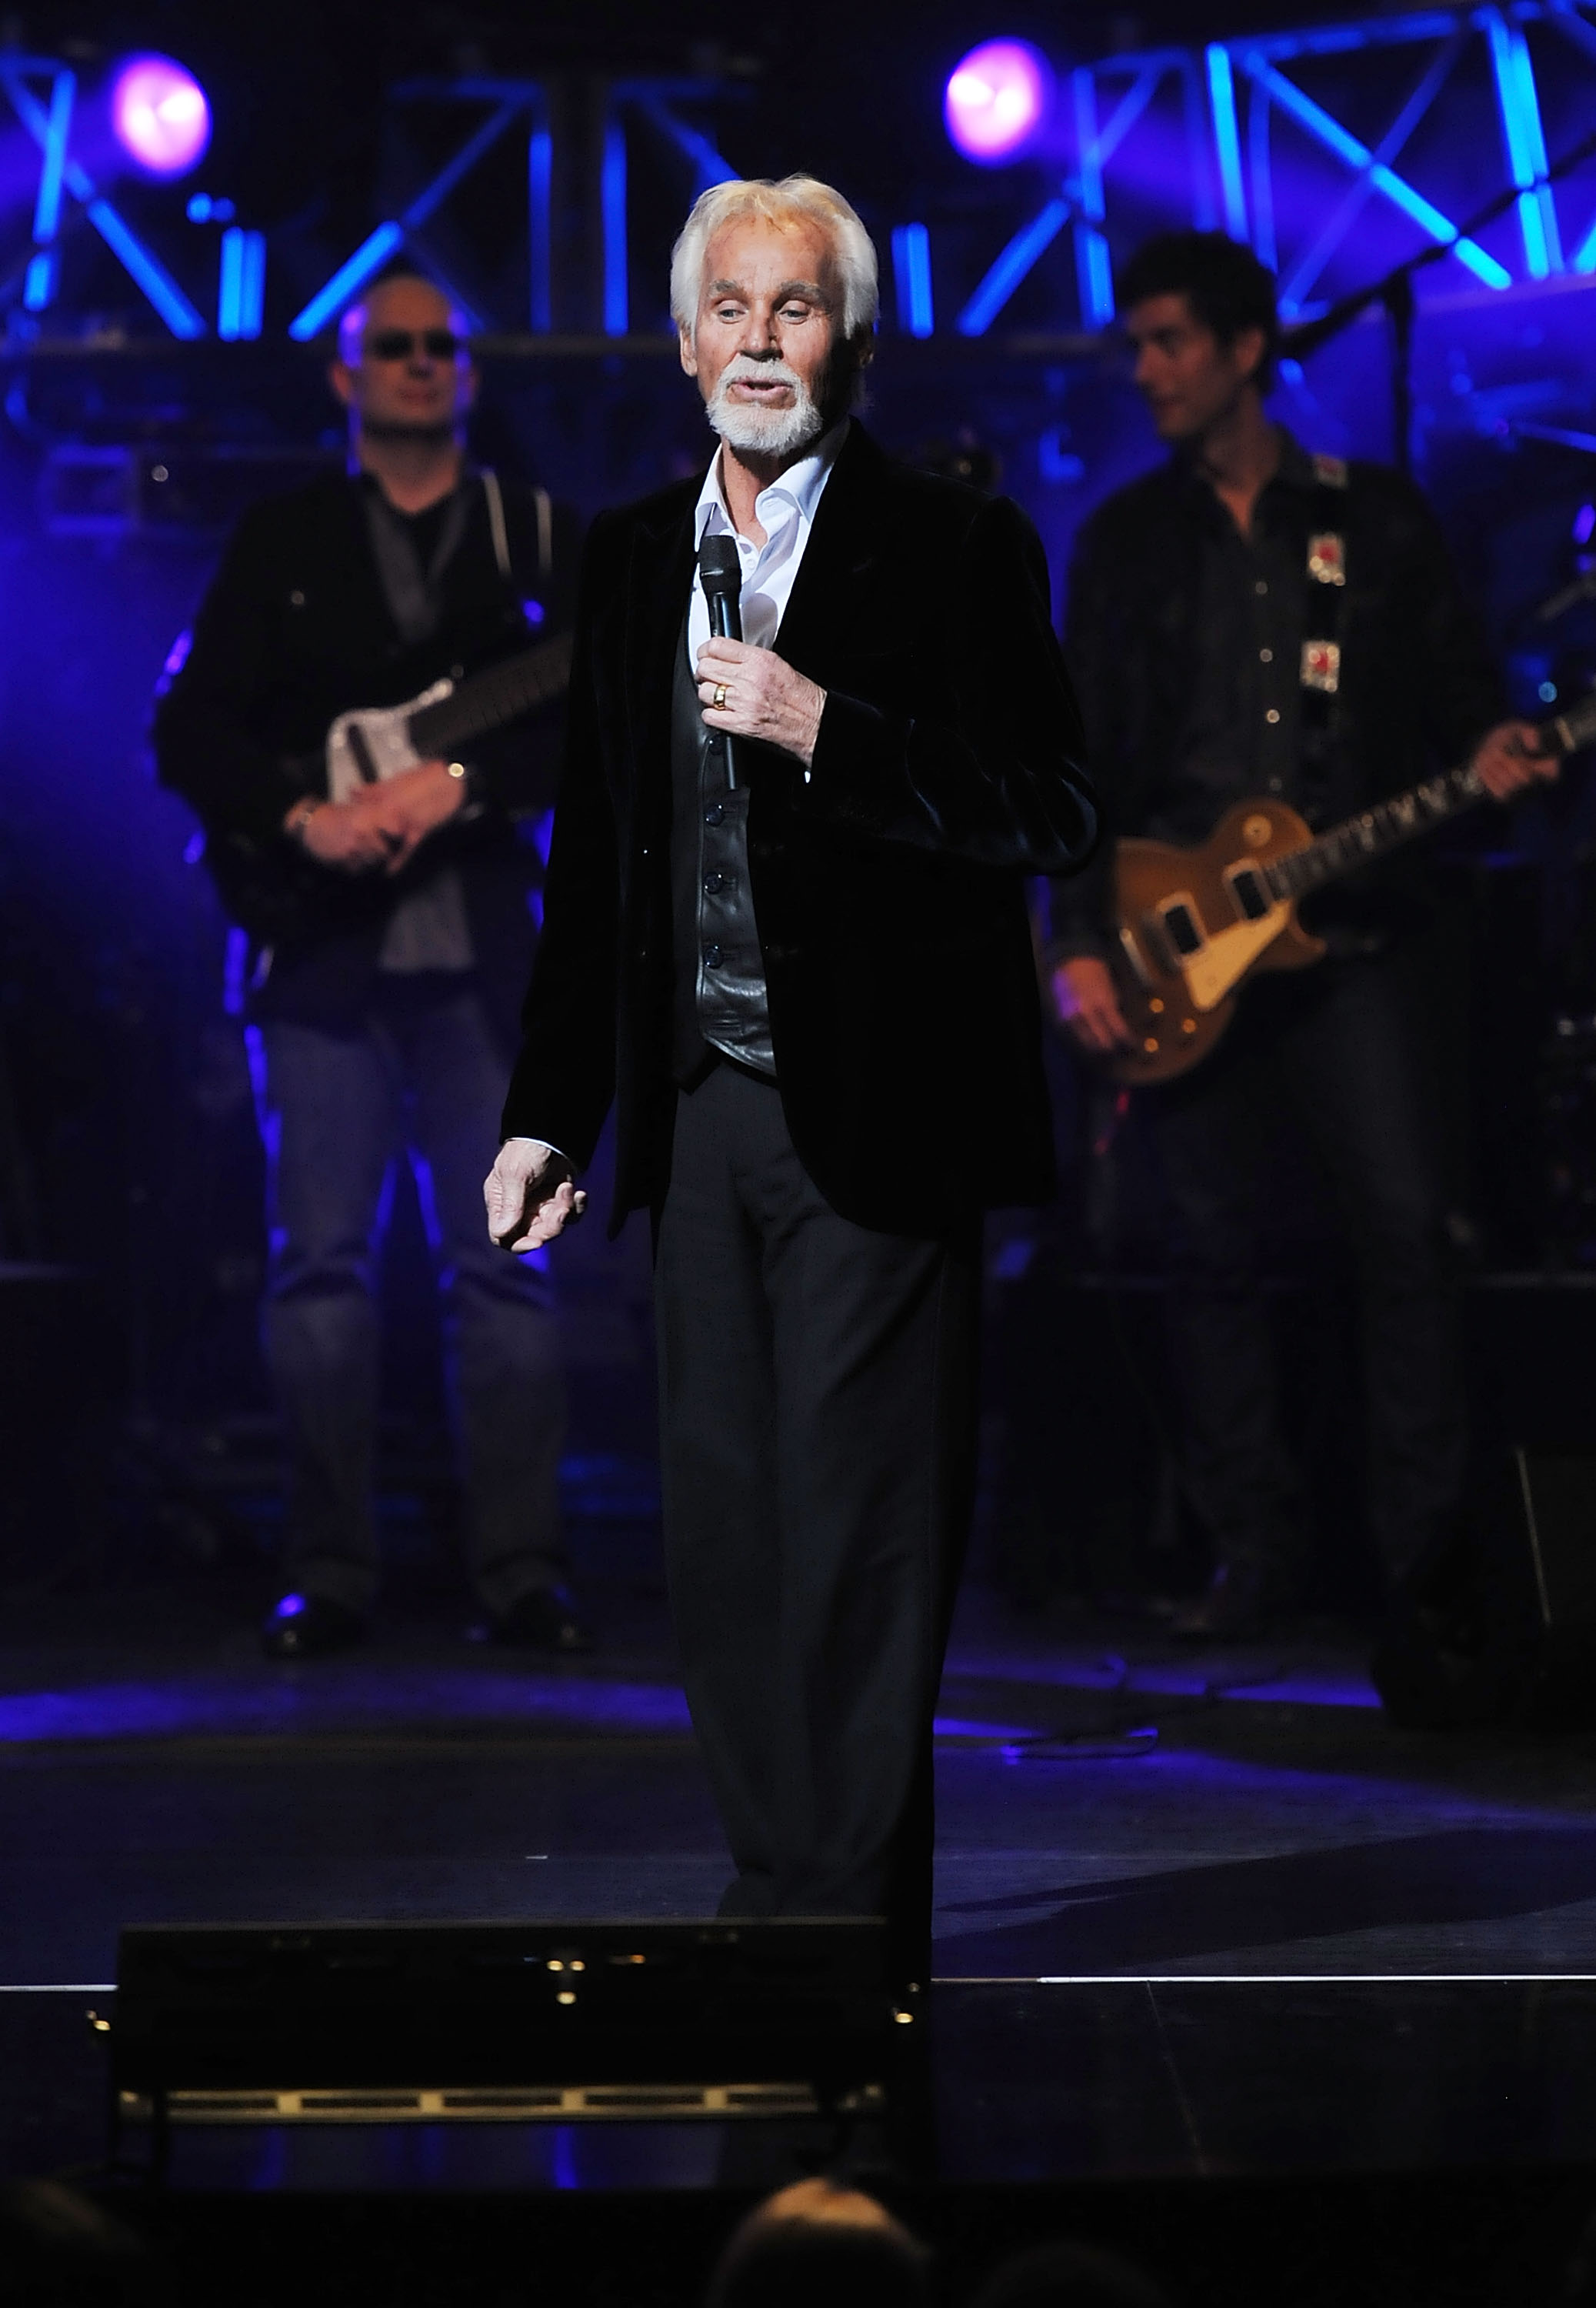 Kenny Rogers in London, England on June 7, 2010 | Source: Getty Images